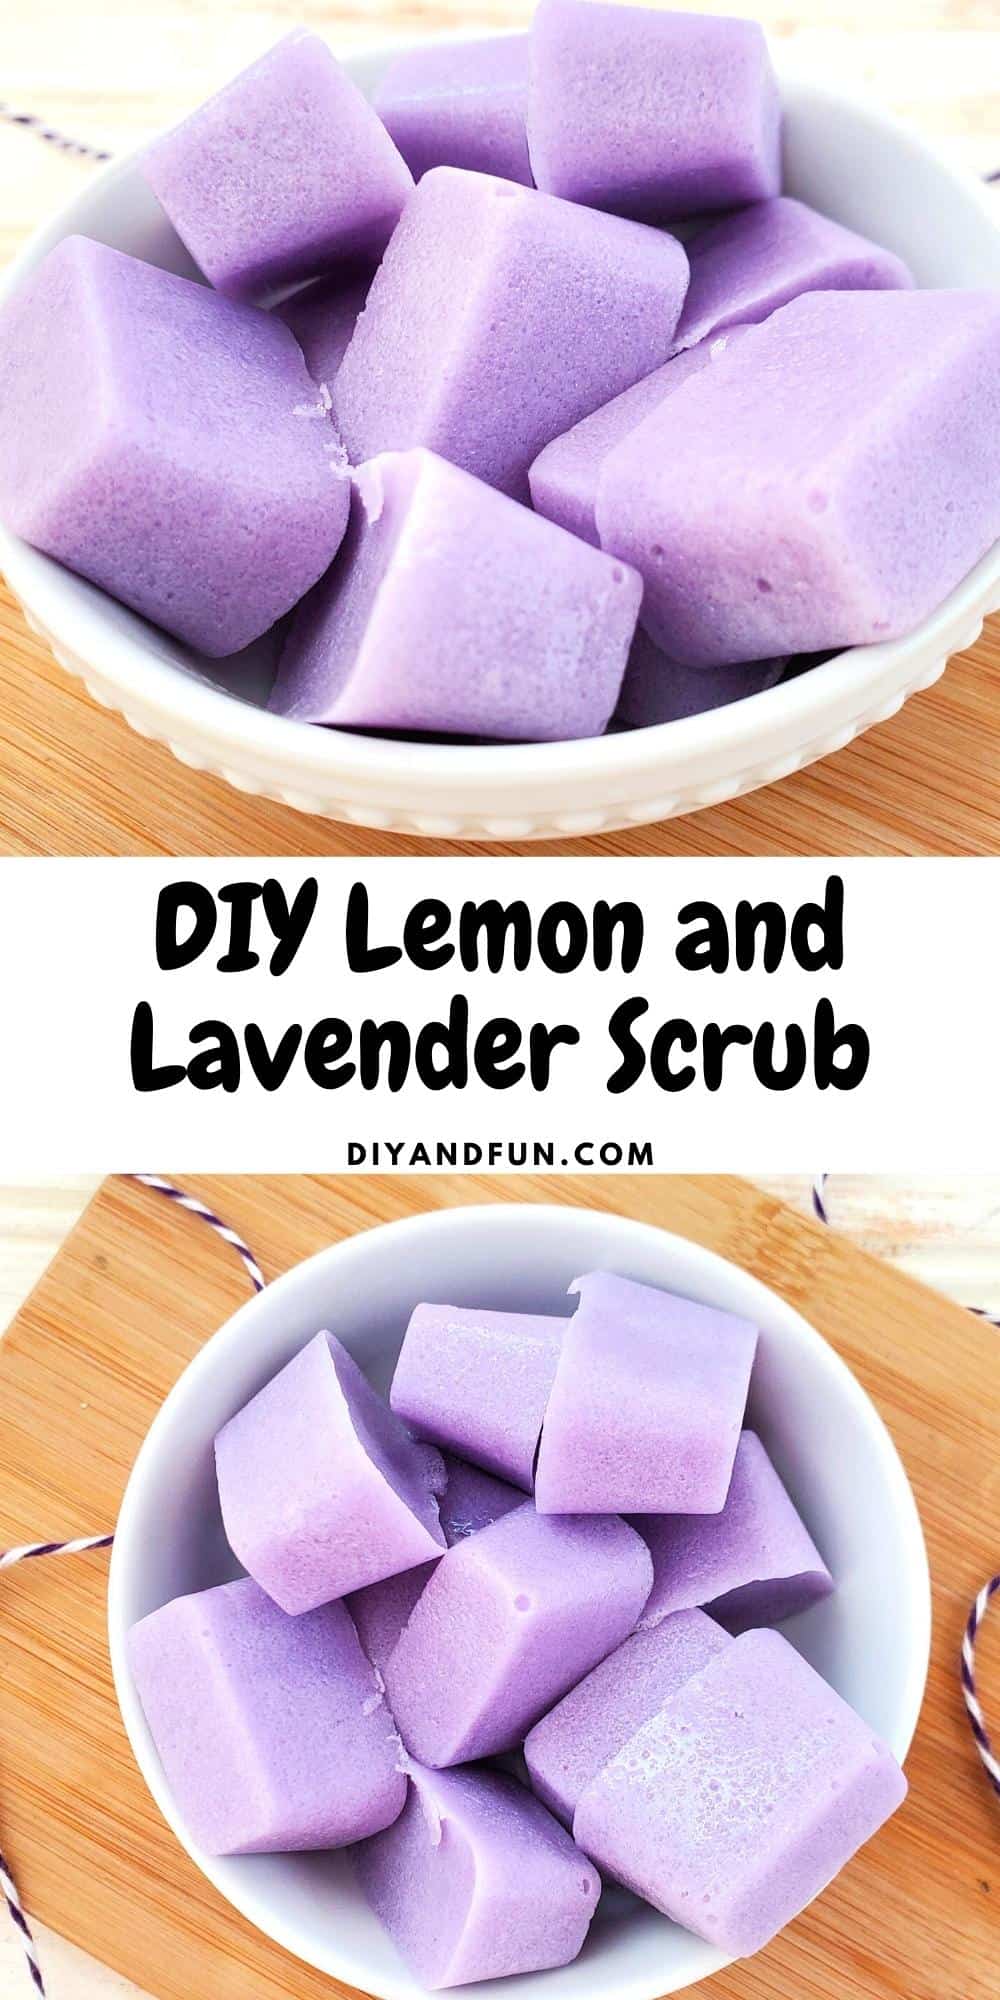 DIY Lavender and Lemon Sugar Scrub, a simple recipe for making homemade face and body that can be used as an exfoliant.